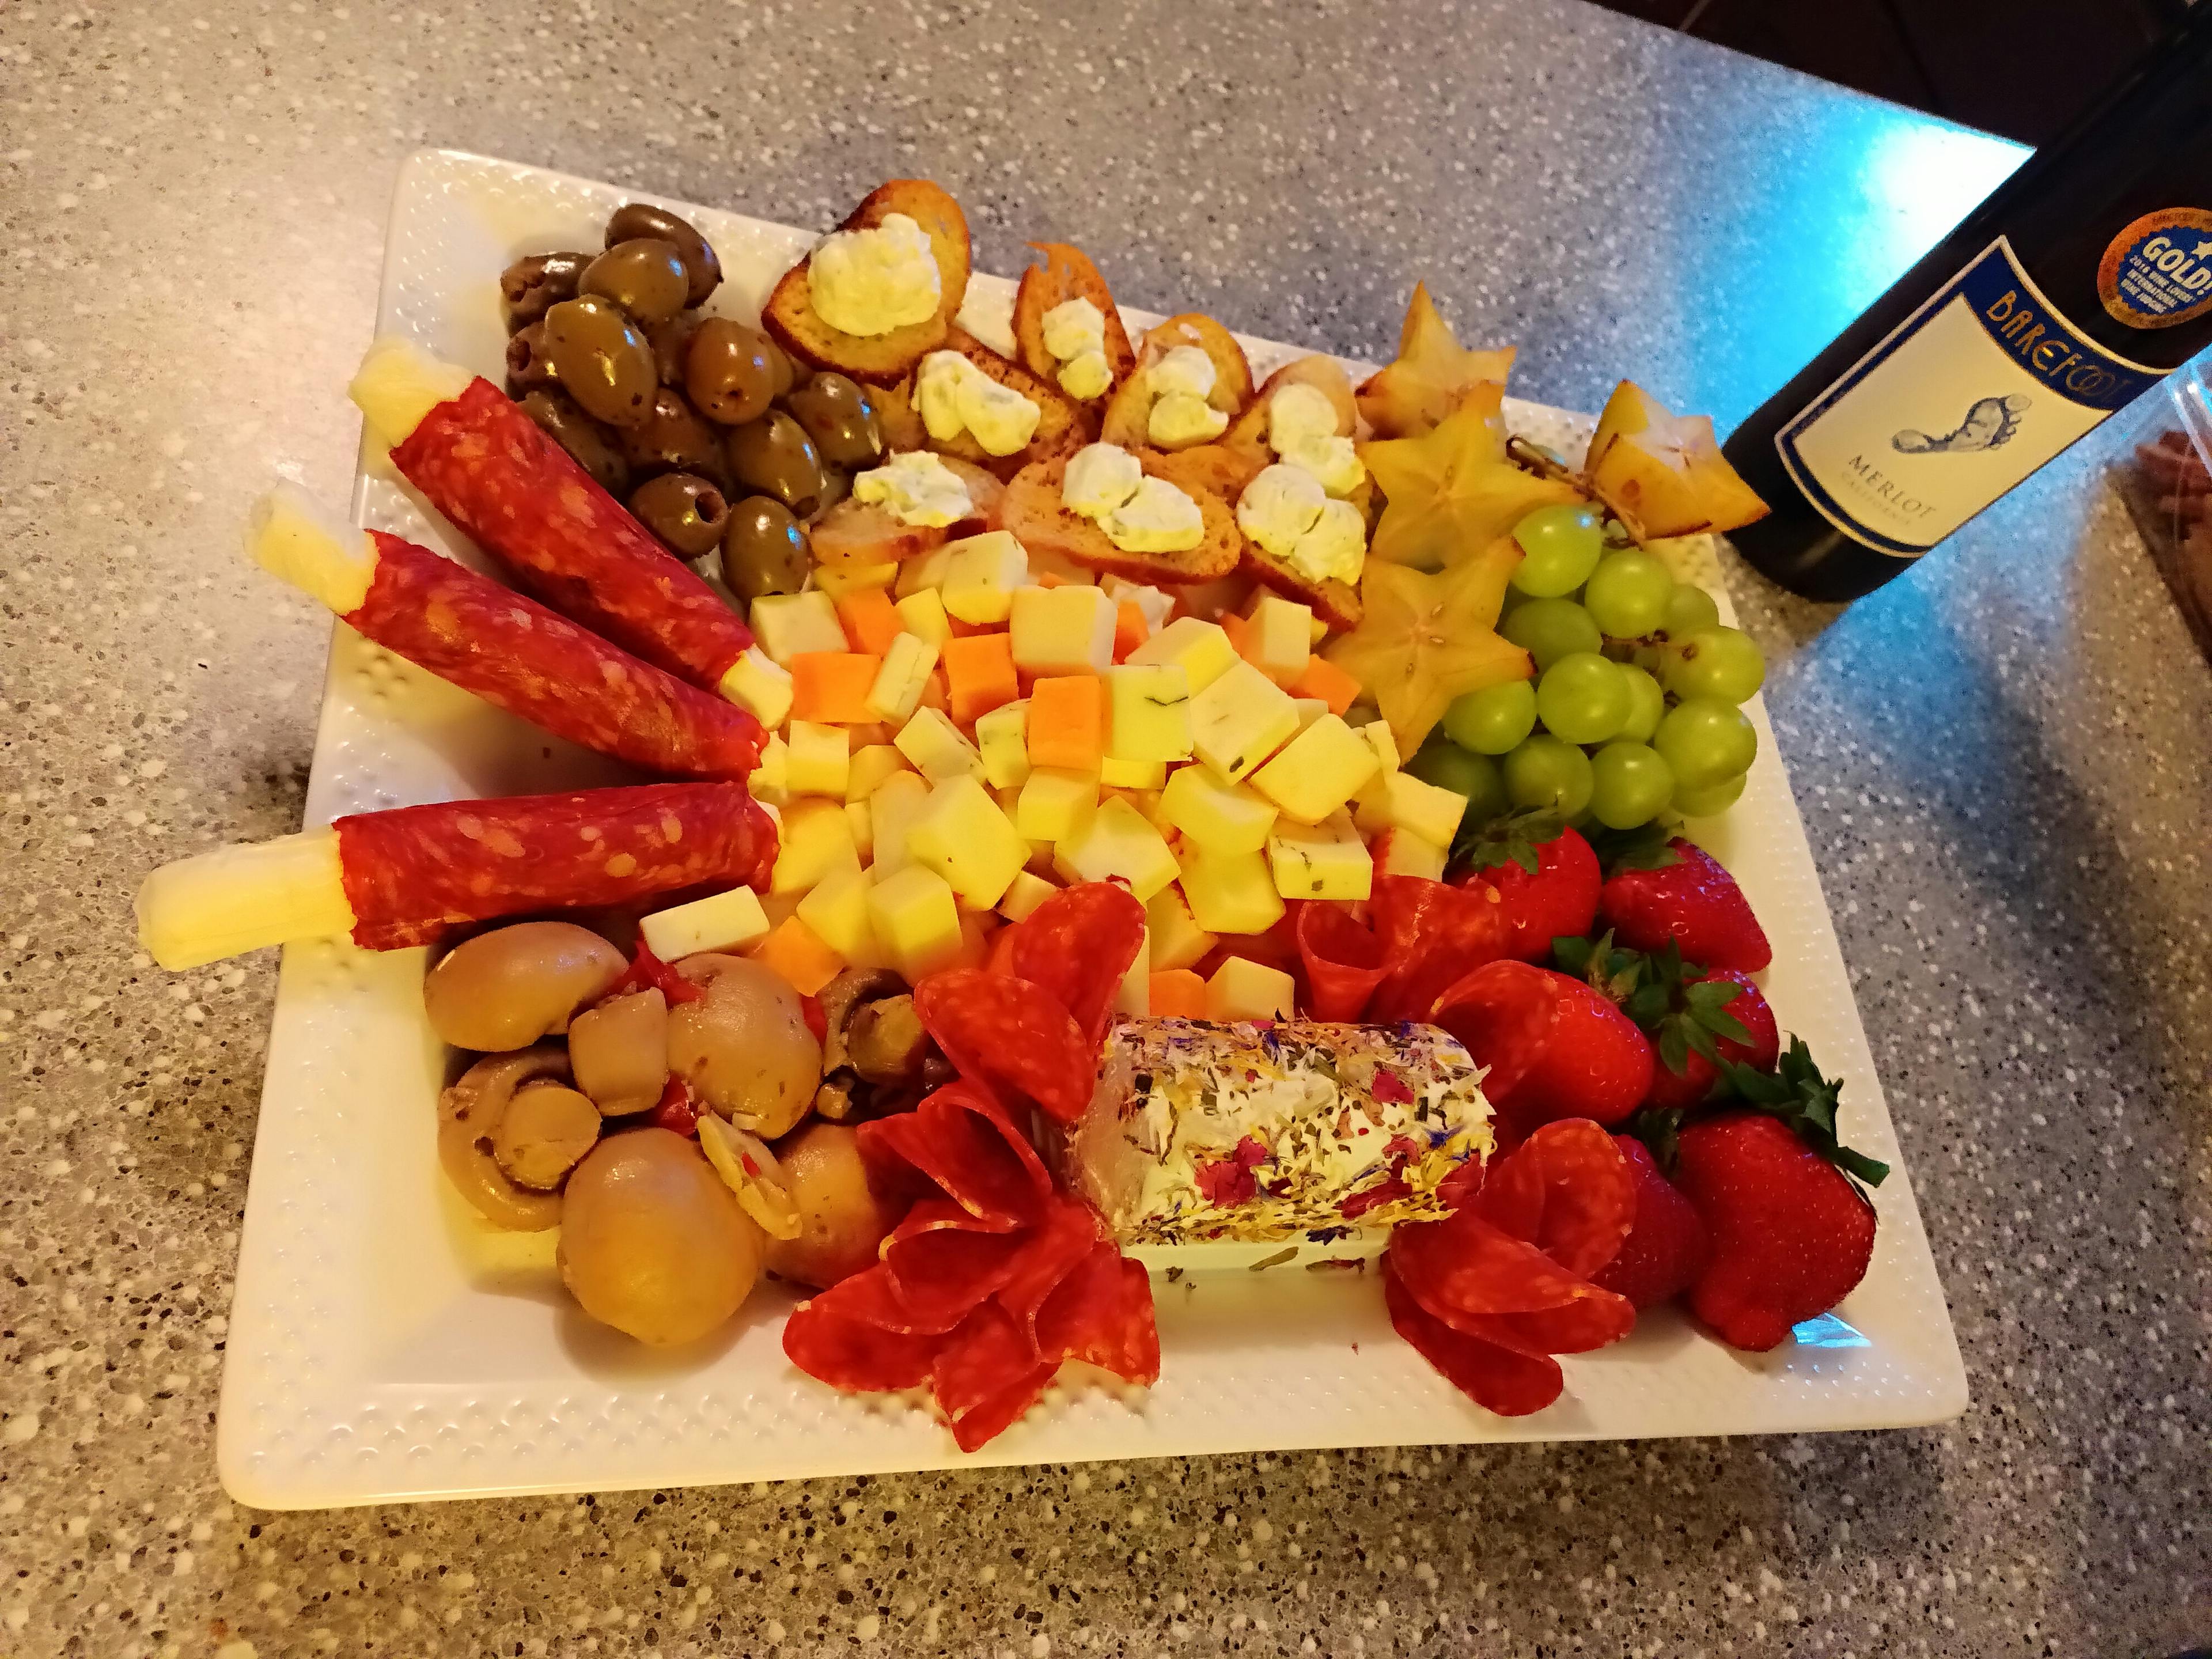 Charcuterie boards and fruit plates